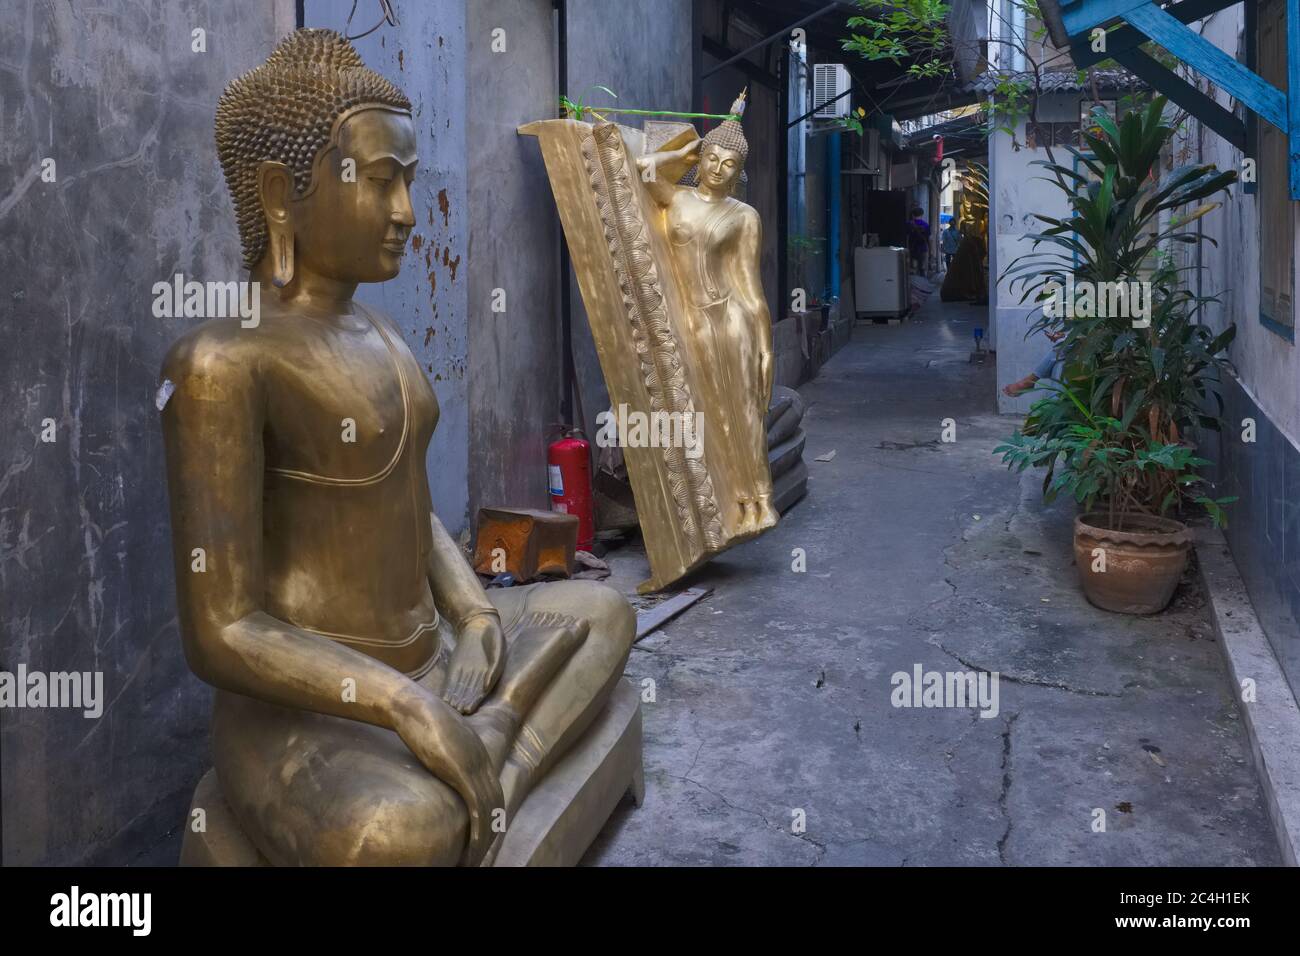 In a lane occupied by a factory producing religious objects off Bamrung Muang Road, Bangkok, Thailand, unfinished Buddha statues line the wall Stock Photo